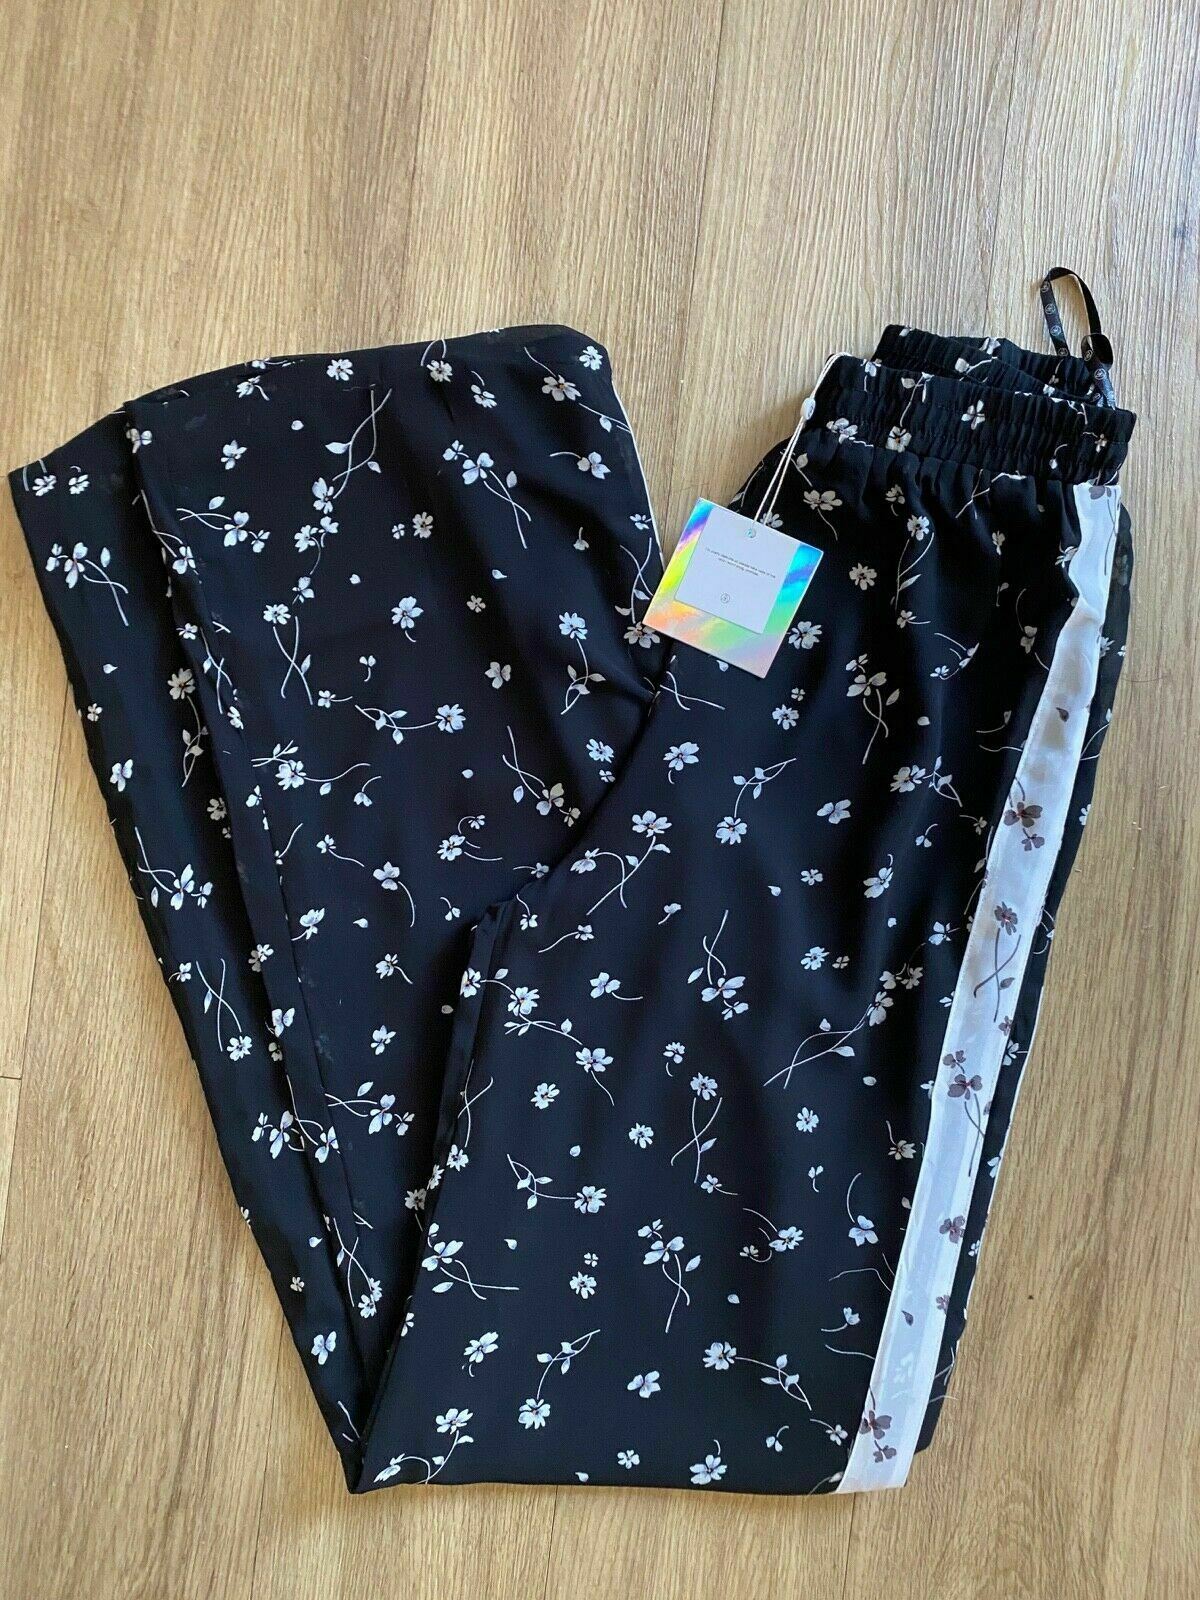 Missguided Tall Wide Leg Floral Trouser Size 8 Chiffon Layered Black White